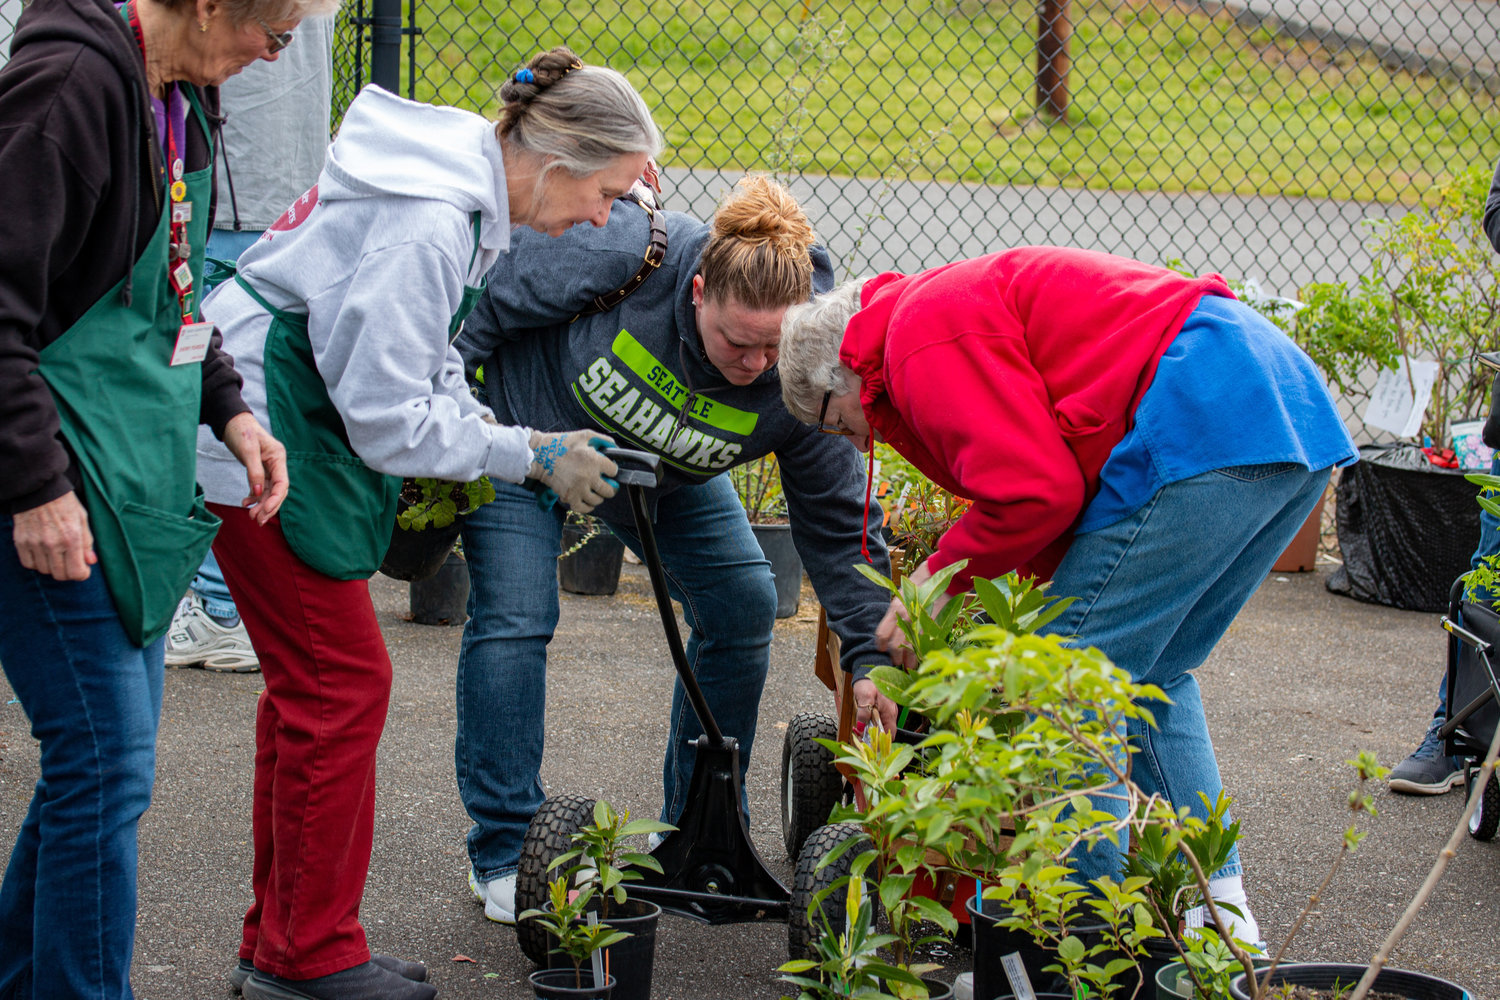 A woman is helped by others after the front wheel of her wagon became unattached at the Master Gardener Plant Sale at the Southwest Washington Fairgrounds Saturday morning.